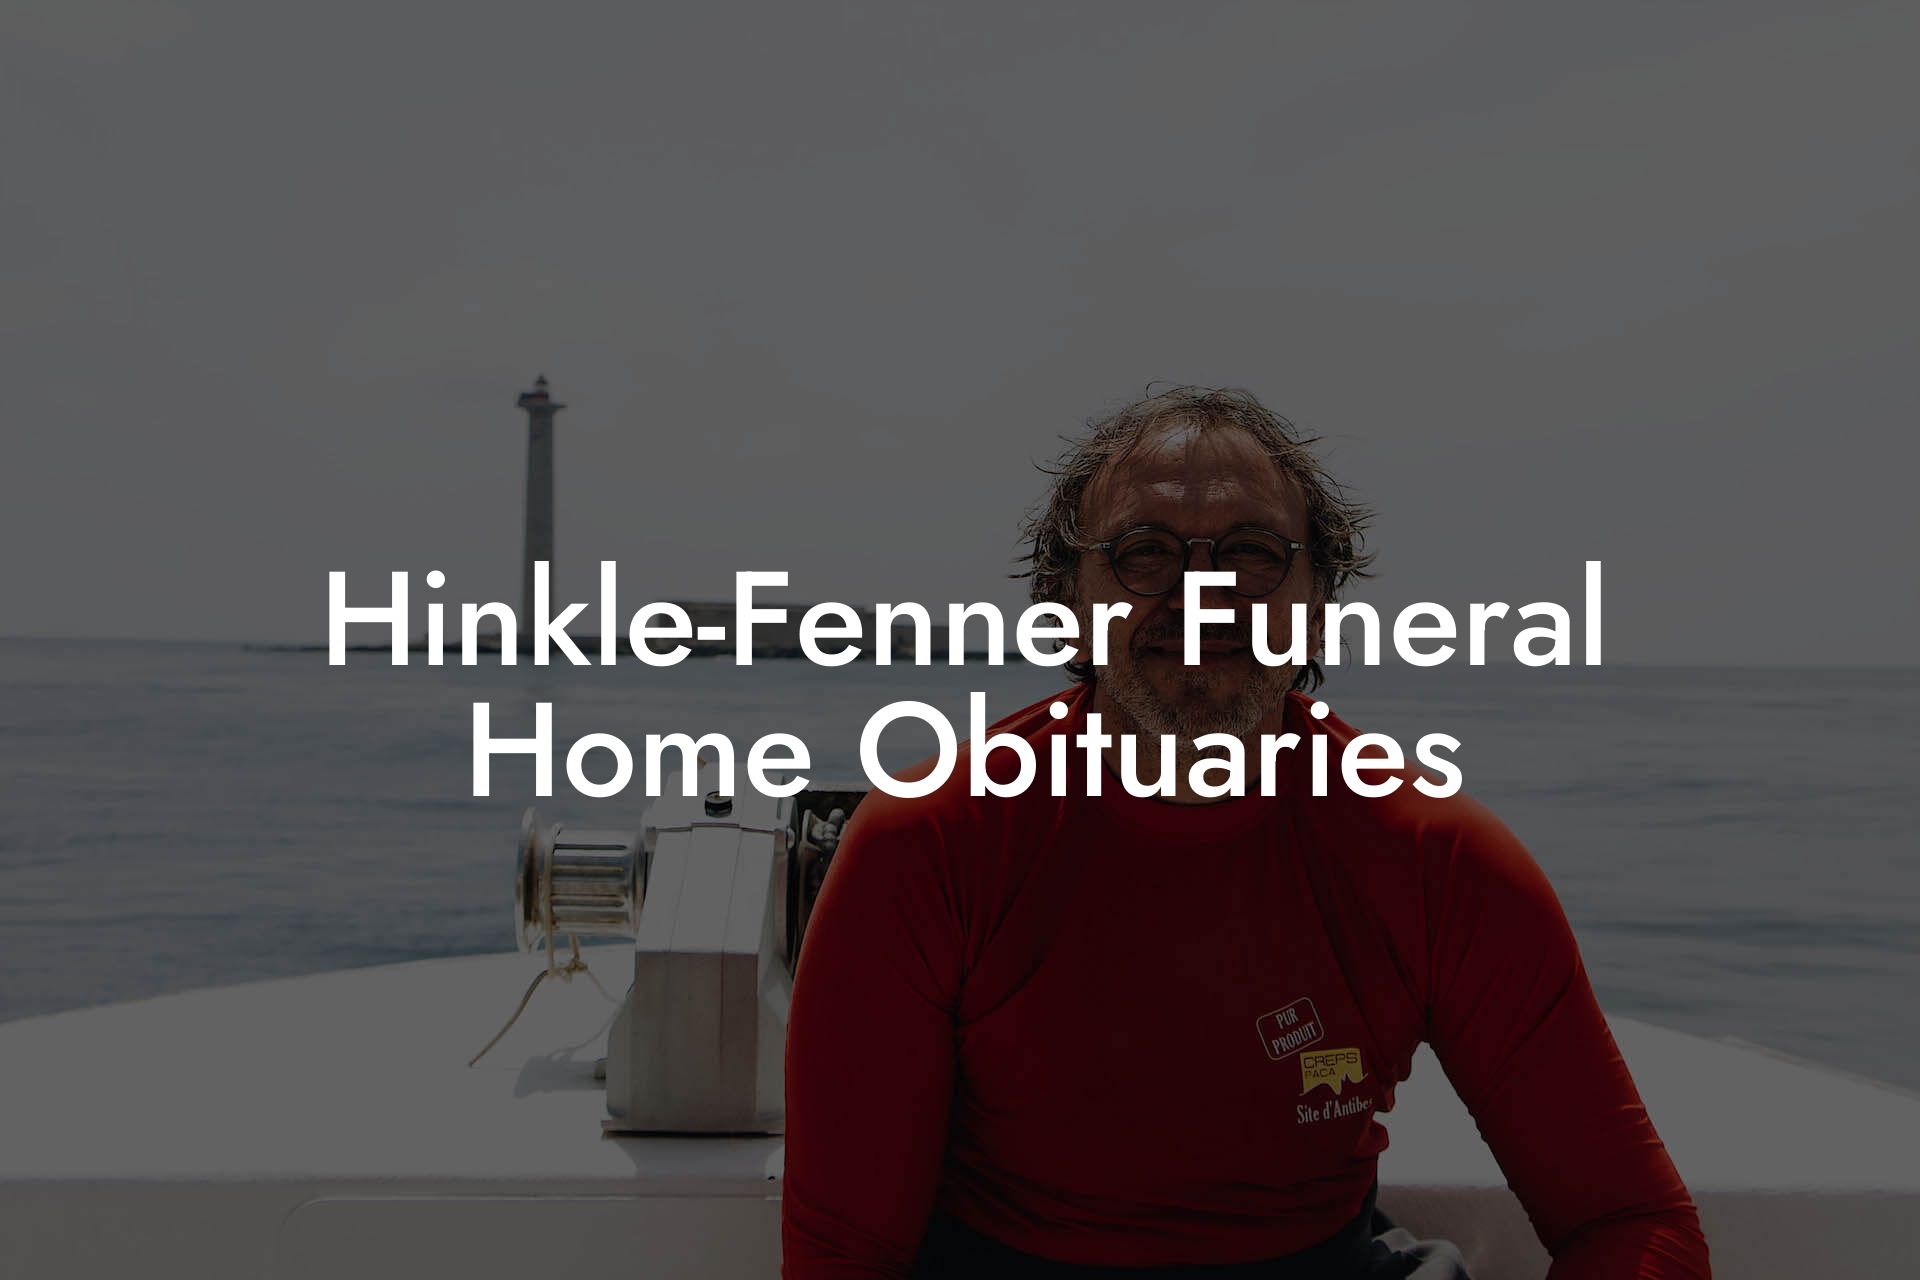 Hinkle-Fenner Funeral Home Obituaries